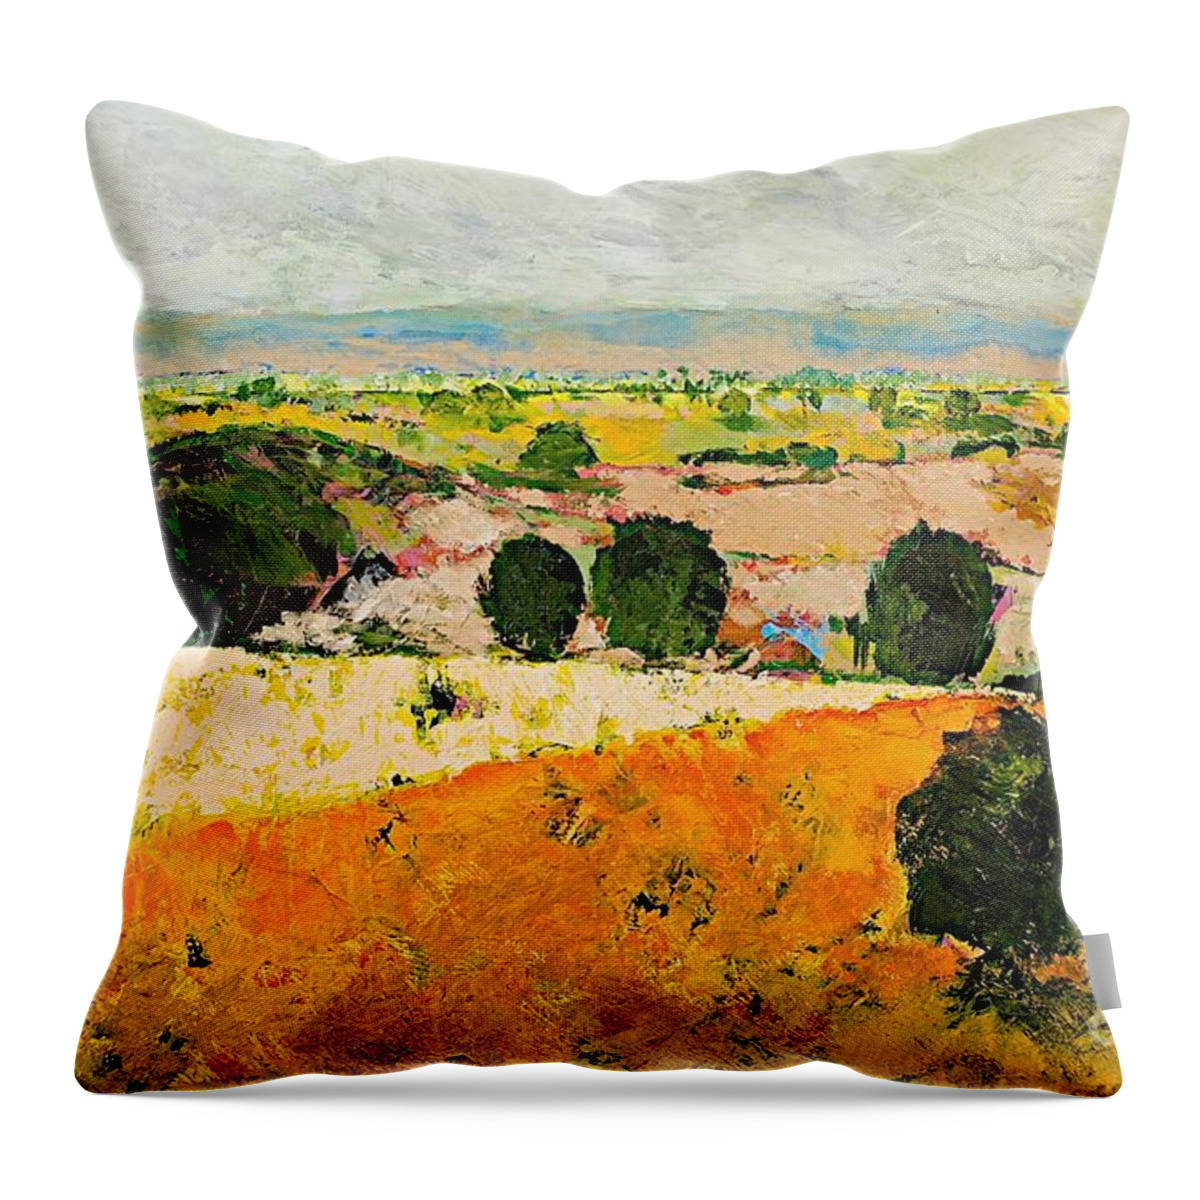 Landscape Throw Pillow featuring the painting Crossing Paradise by Allan P Friedlander